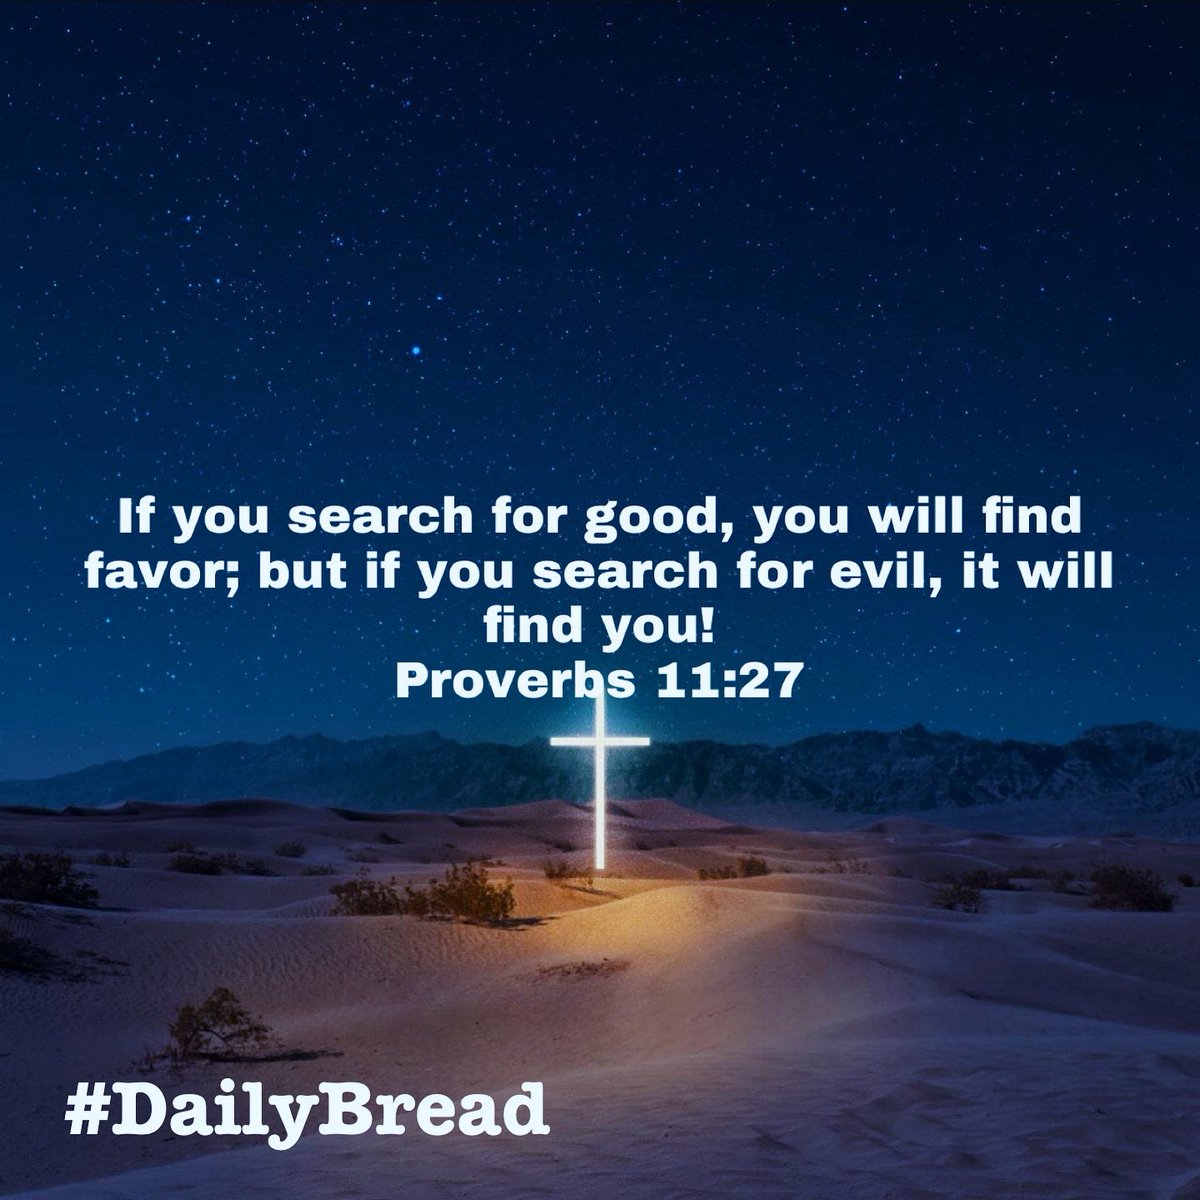 If you search for good, you will find favor; but if you search for evil, it will find you!! #Proverbs 11:27 #DailyBread #GodsPlan #SearchForGood #GodsFavor #SpeakLife